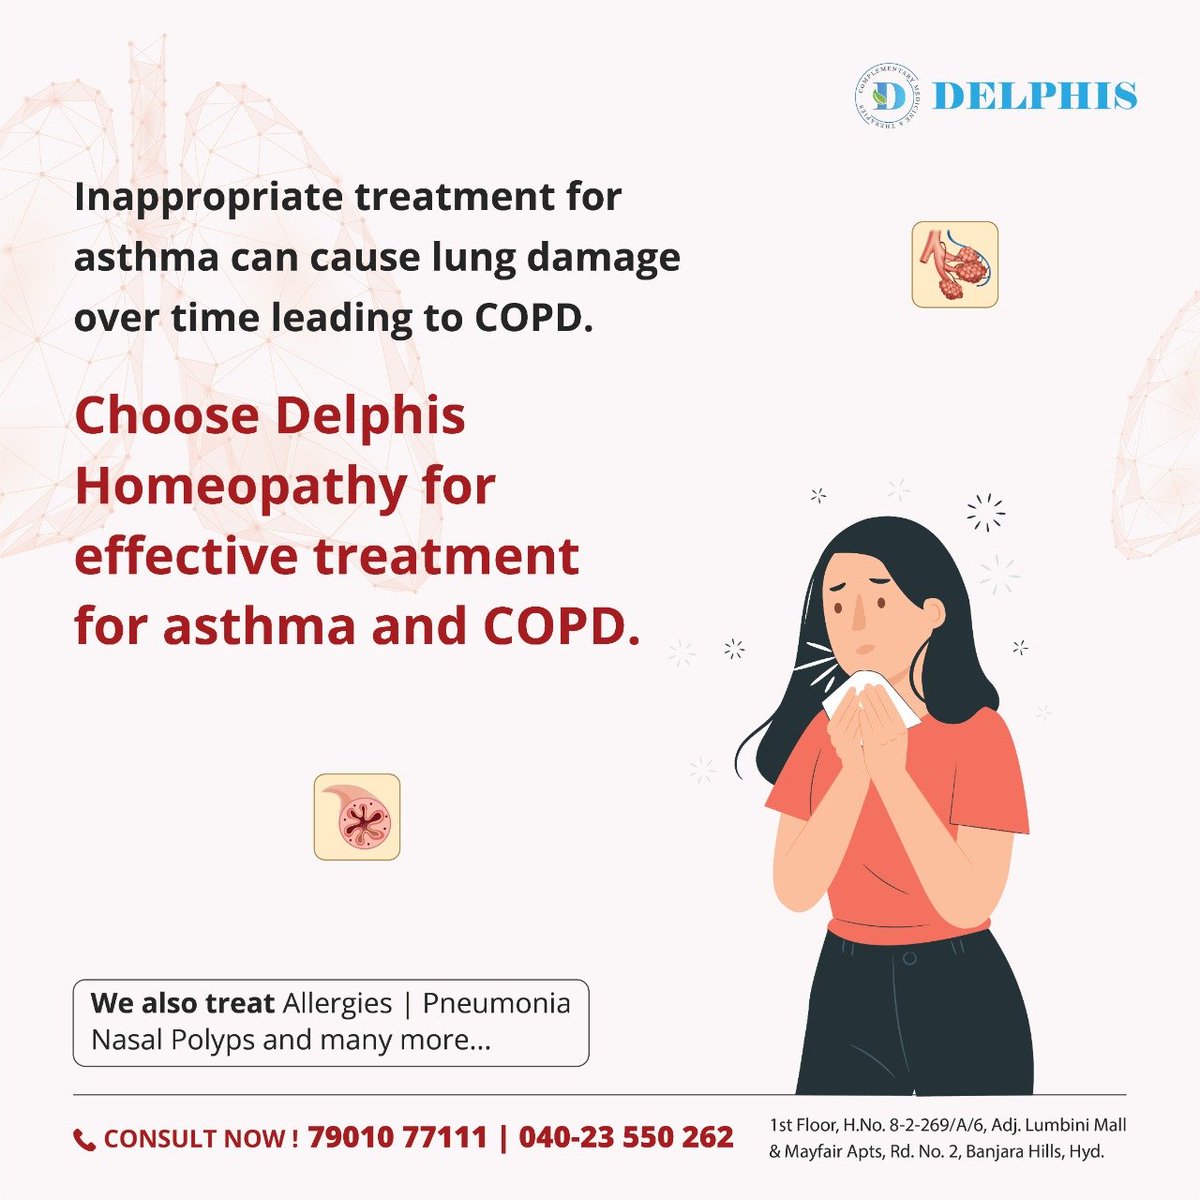 If you have been suffering from respiratory problems for a long time, it could be due to #COPD.
Choose #Delphis #Homeopathy and Breathe Easy!
Visit us @ delphishomeopathy.com/homeo-remedies…
Or
Consult Now @ +91 7901077111
#delphishomeopathy #COPDtreatment #Homeo #HomeoClinic #Homeopathyclinic